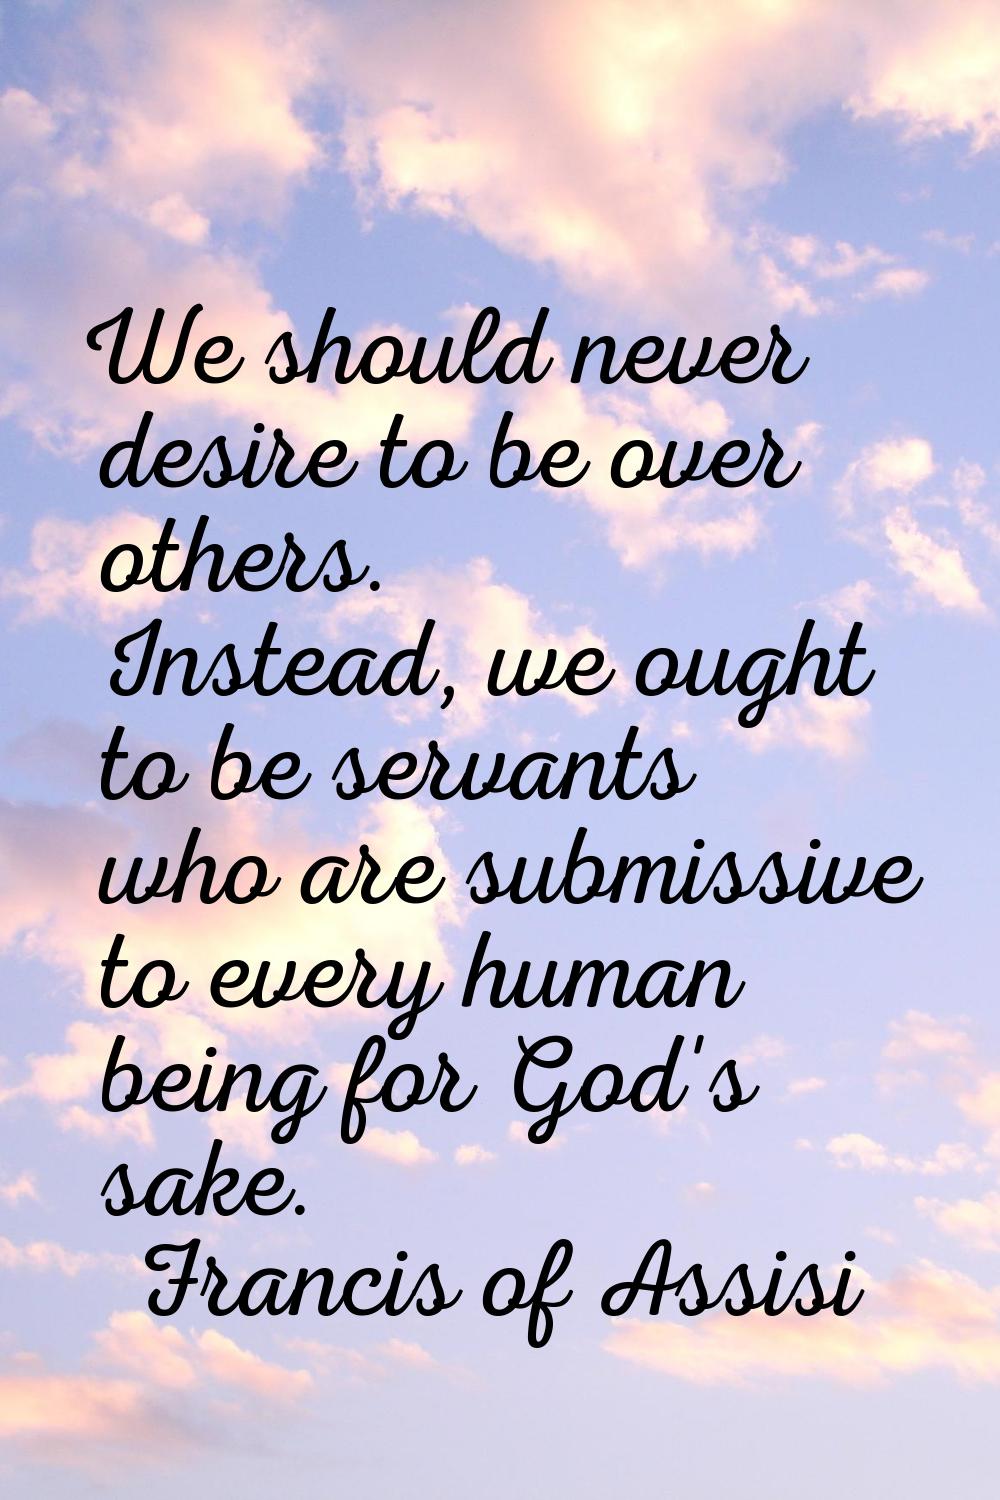 We should never desire to be over others. Instead, we ought to be servants who are submissive to ev